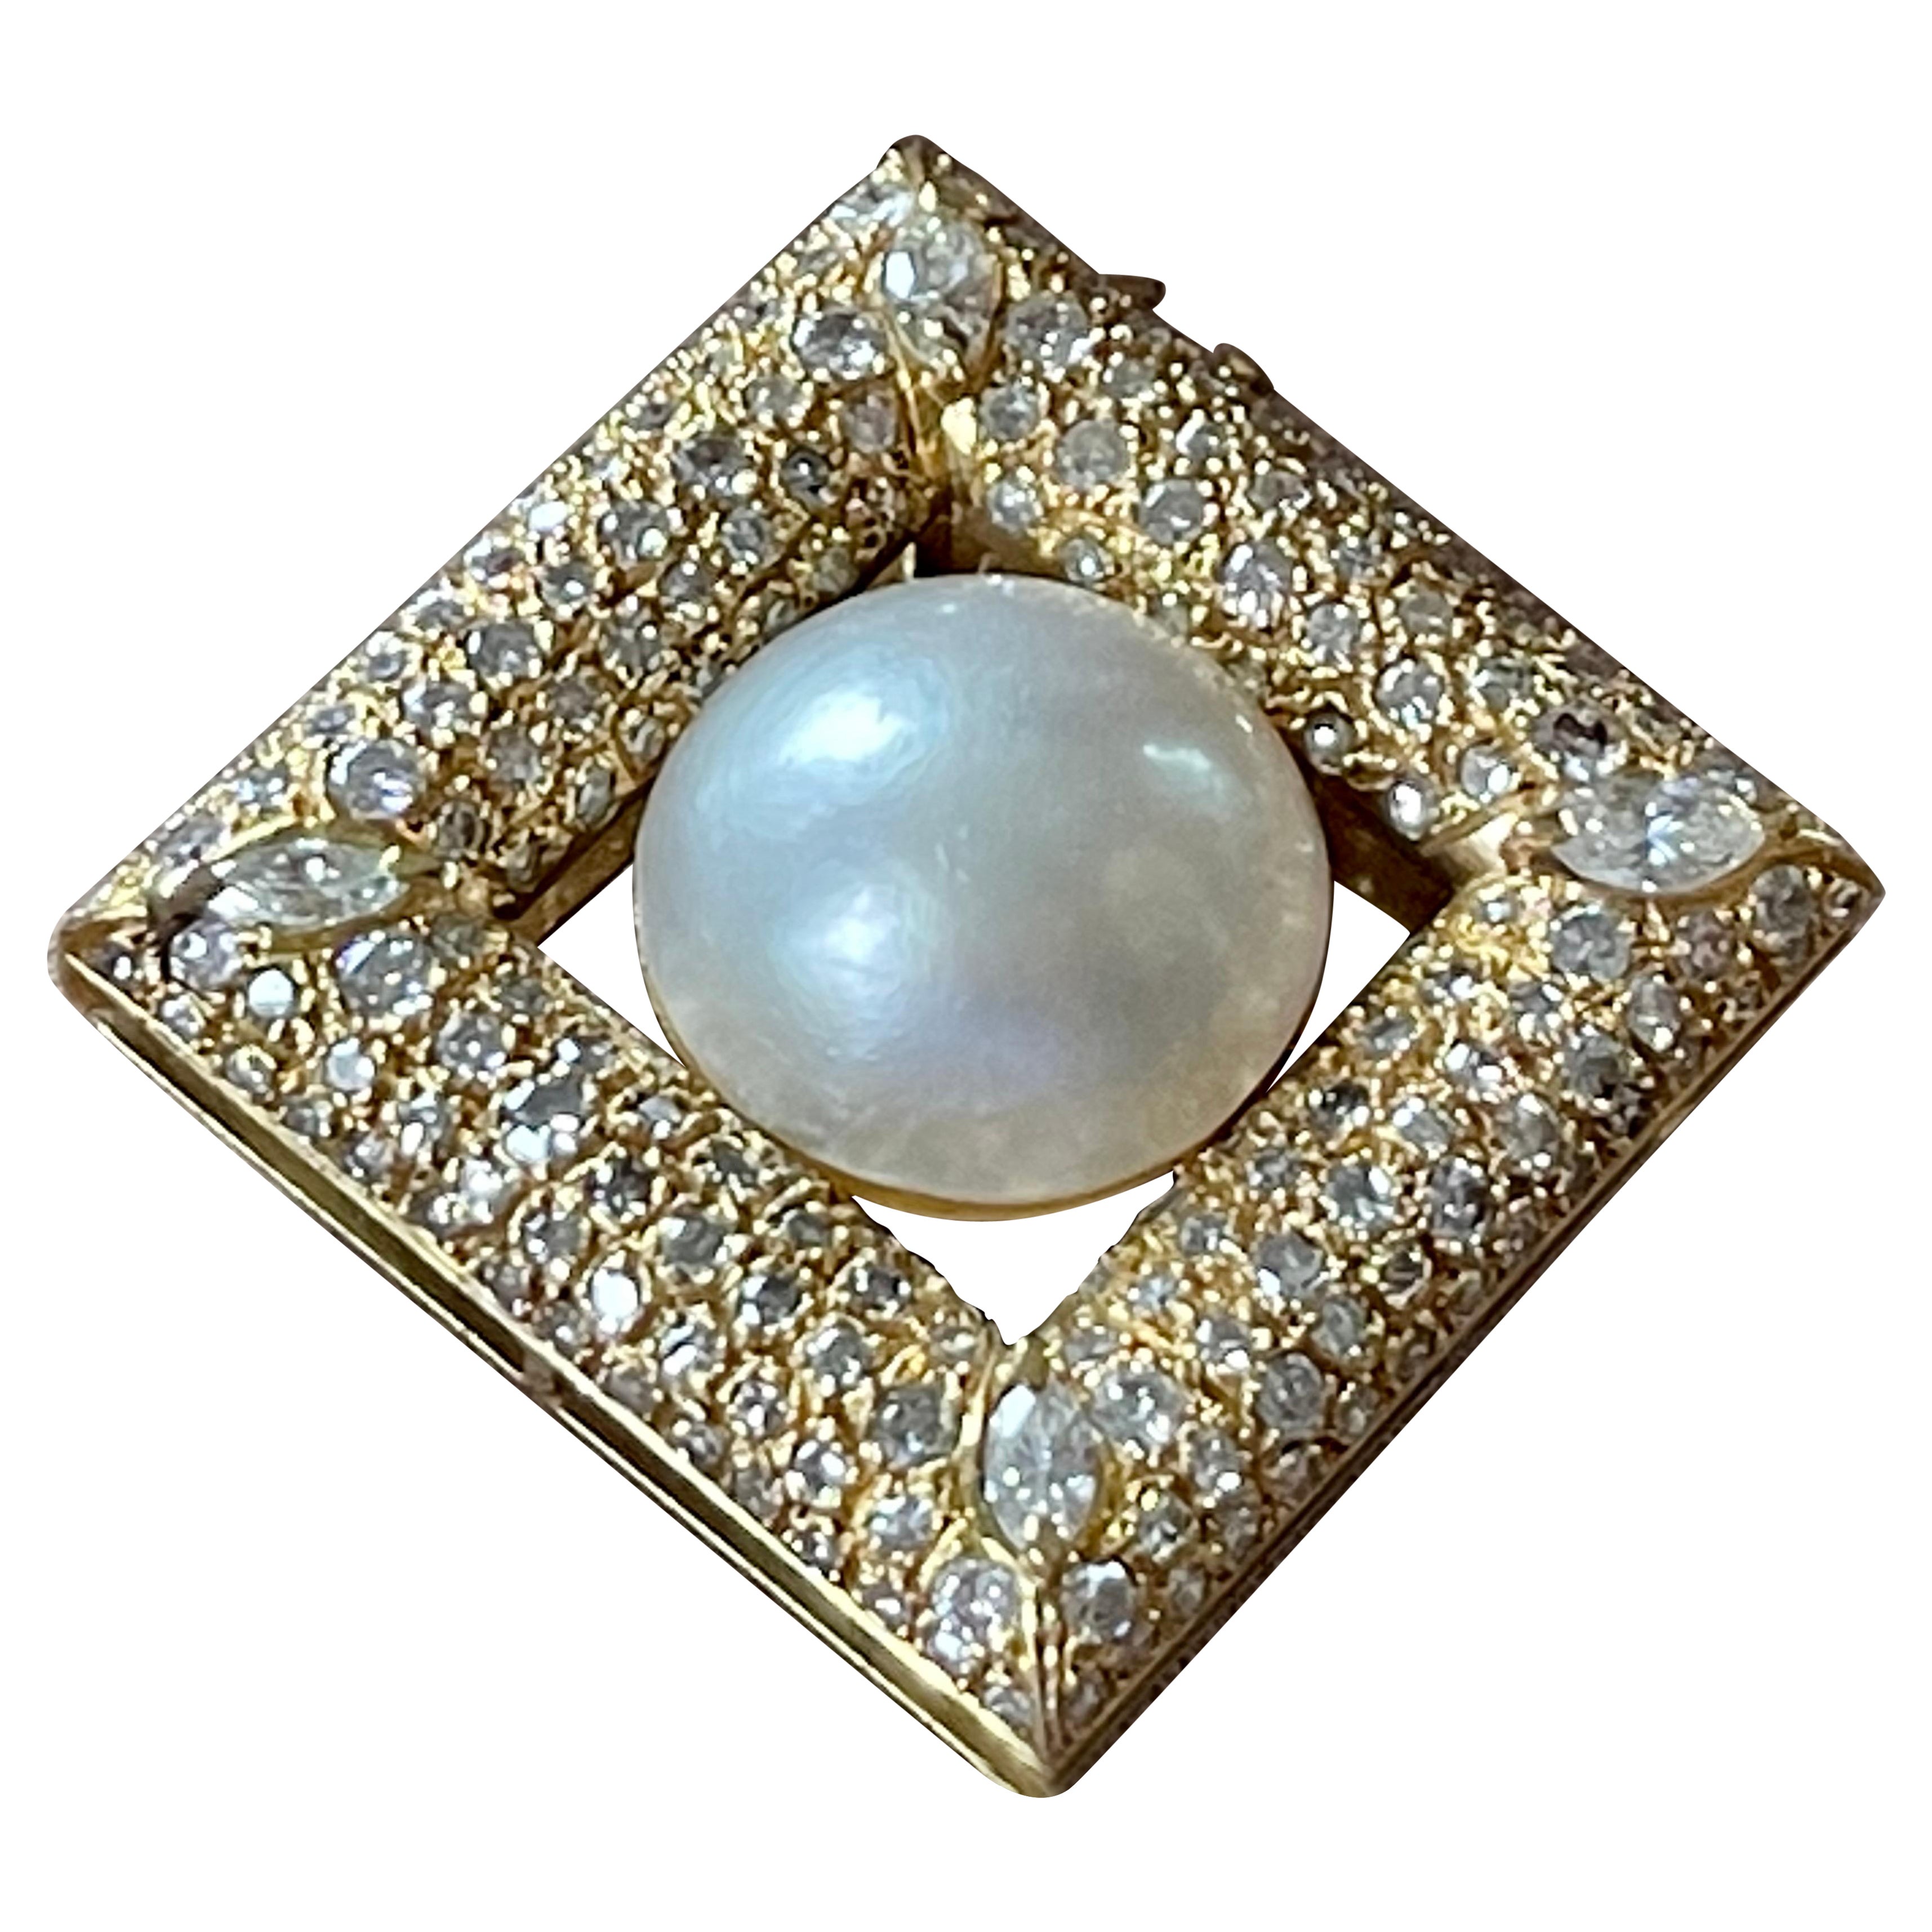 Vintage Brooch 18 K Yellow Gold Diamonds Mabe Pearl For Sale